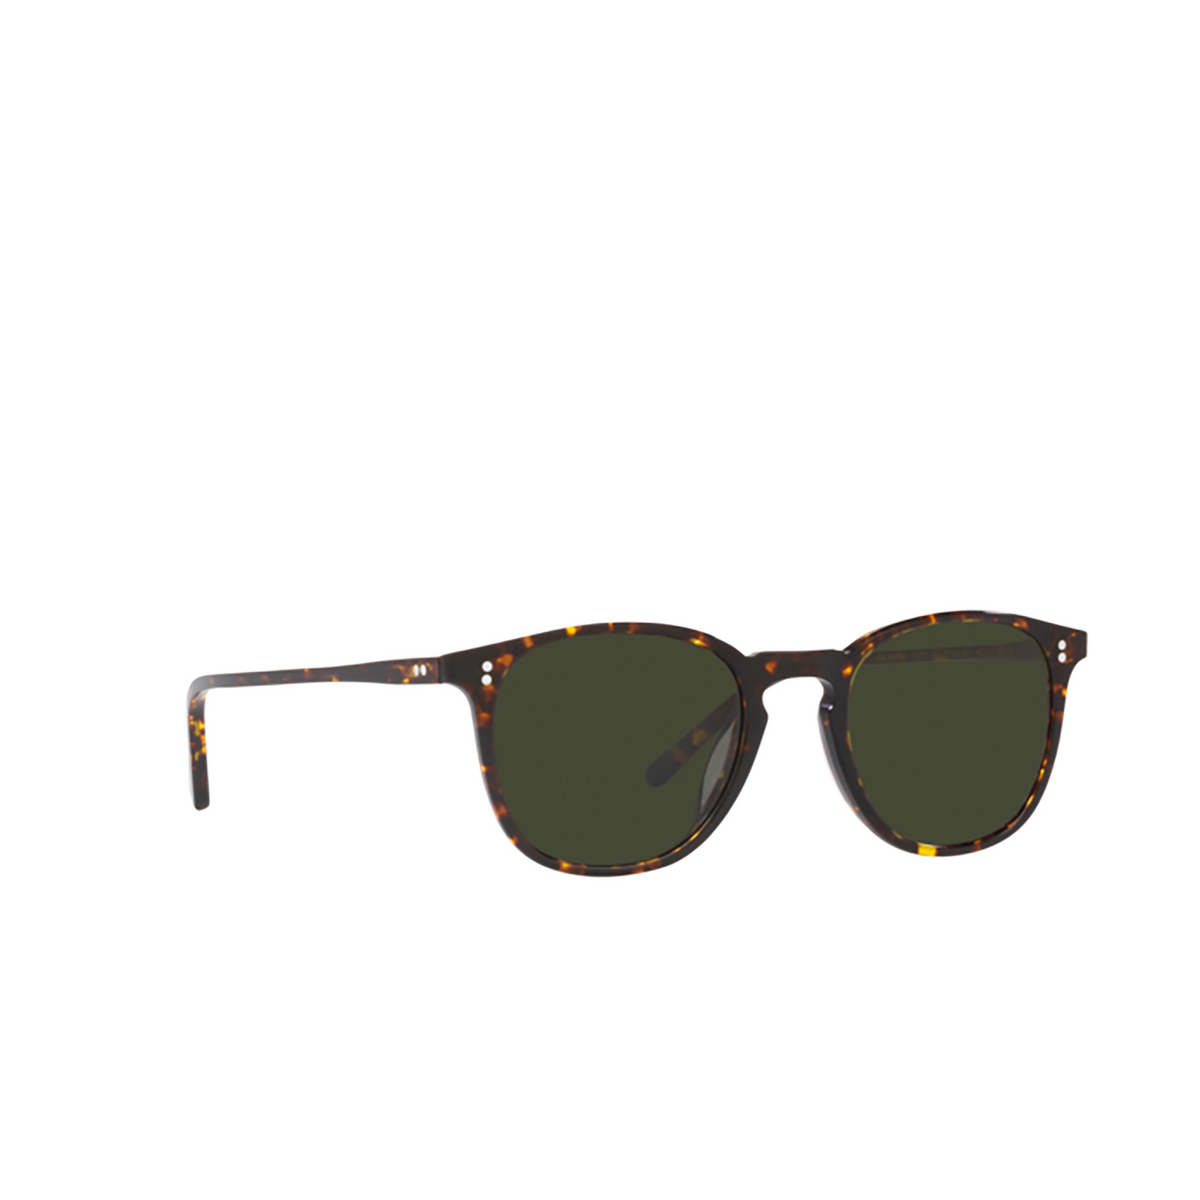 Oliver Peoples FINLEY 1993 Sunglasses 1743P1 Cherry Blossom - three-quarters view